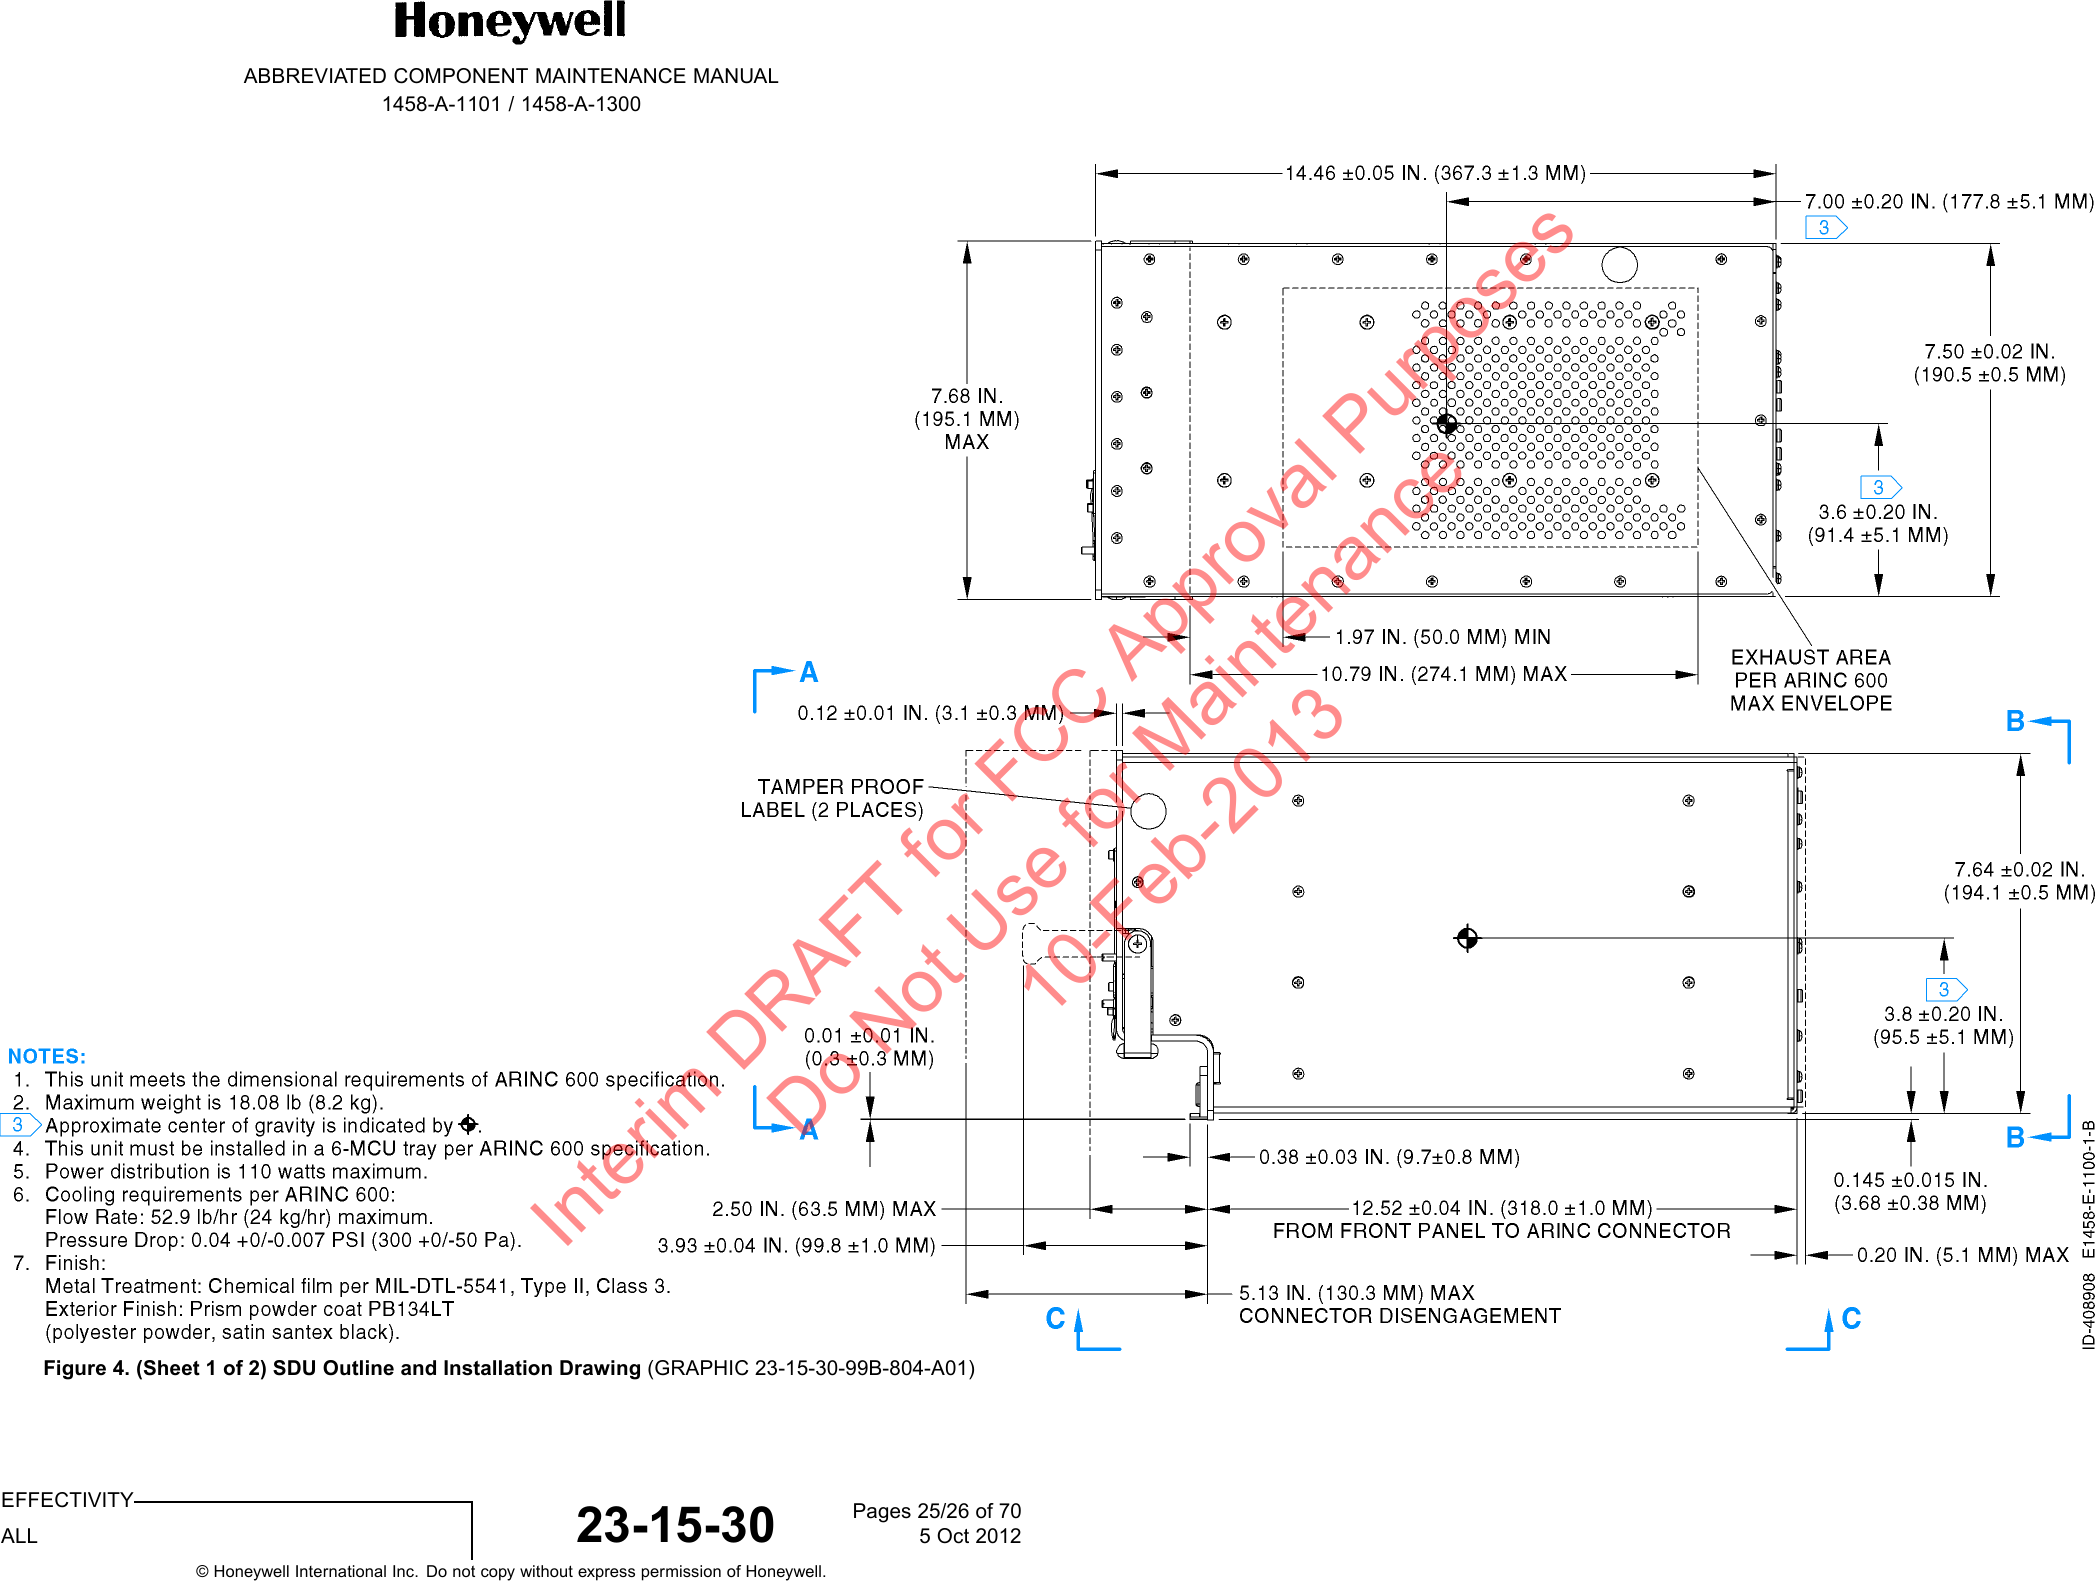 ABBREVIATED COMPONENT MAINTENANCE MANUAL1458-A-1101 / 1458-A-1300Figure 4. (Sheet 1 of 2) SDU Outline and Installation Drawing (GRAPHIC 23-15-30-99B-804-A01)EFFECTIVITYALL 23-15-30 Pages 25/26 of 705 Oct 2012© Honeywell International Inc. Do not copy without express permission of Honeywell.Interim DRAFT for FCC Approval Purposes Do Not Use for Maintenance 10-Feb-2013